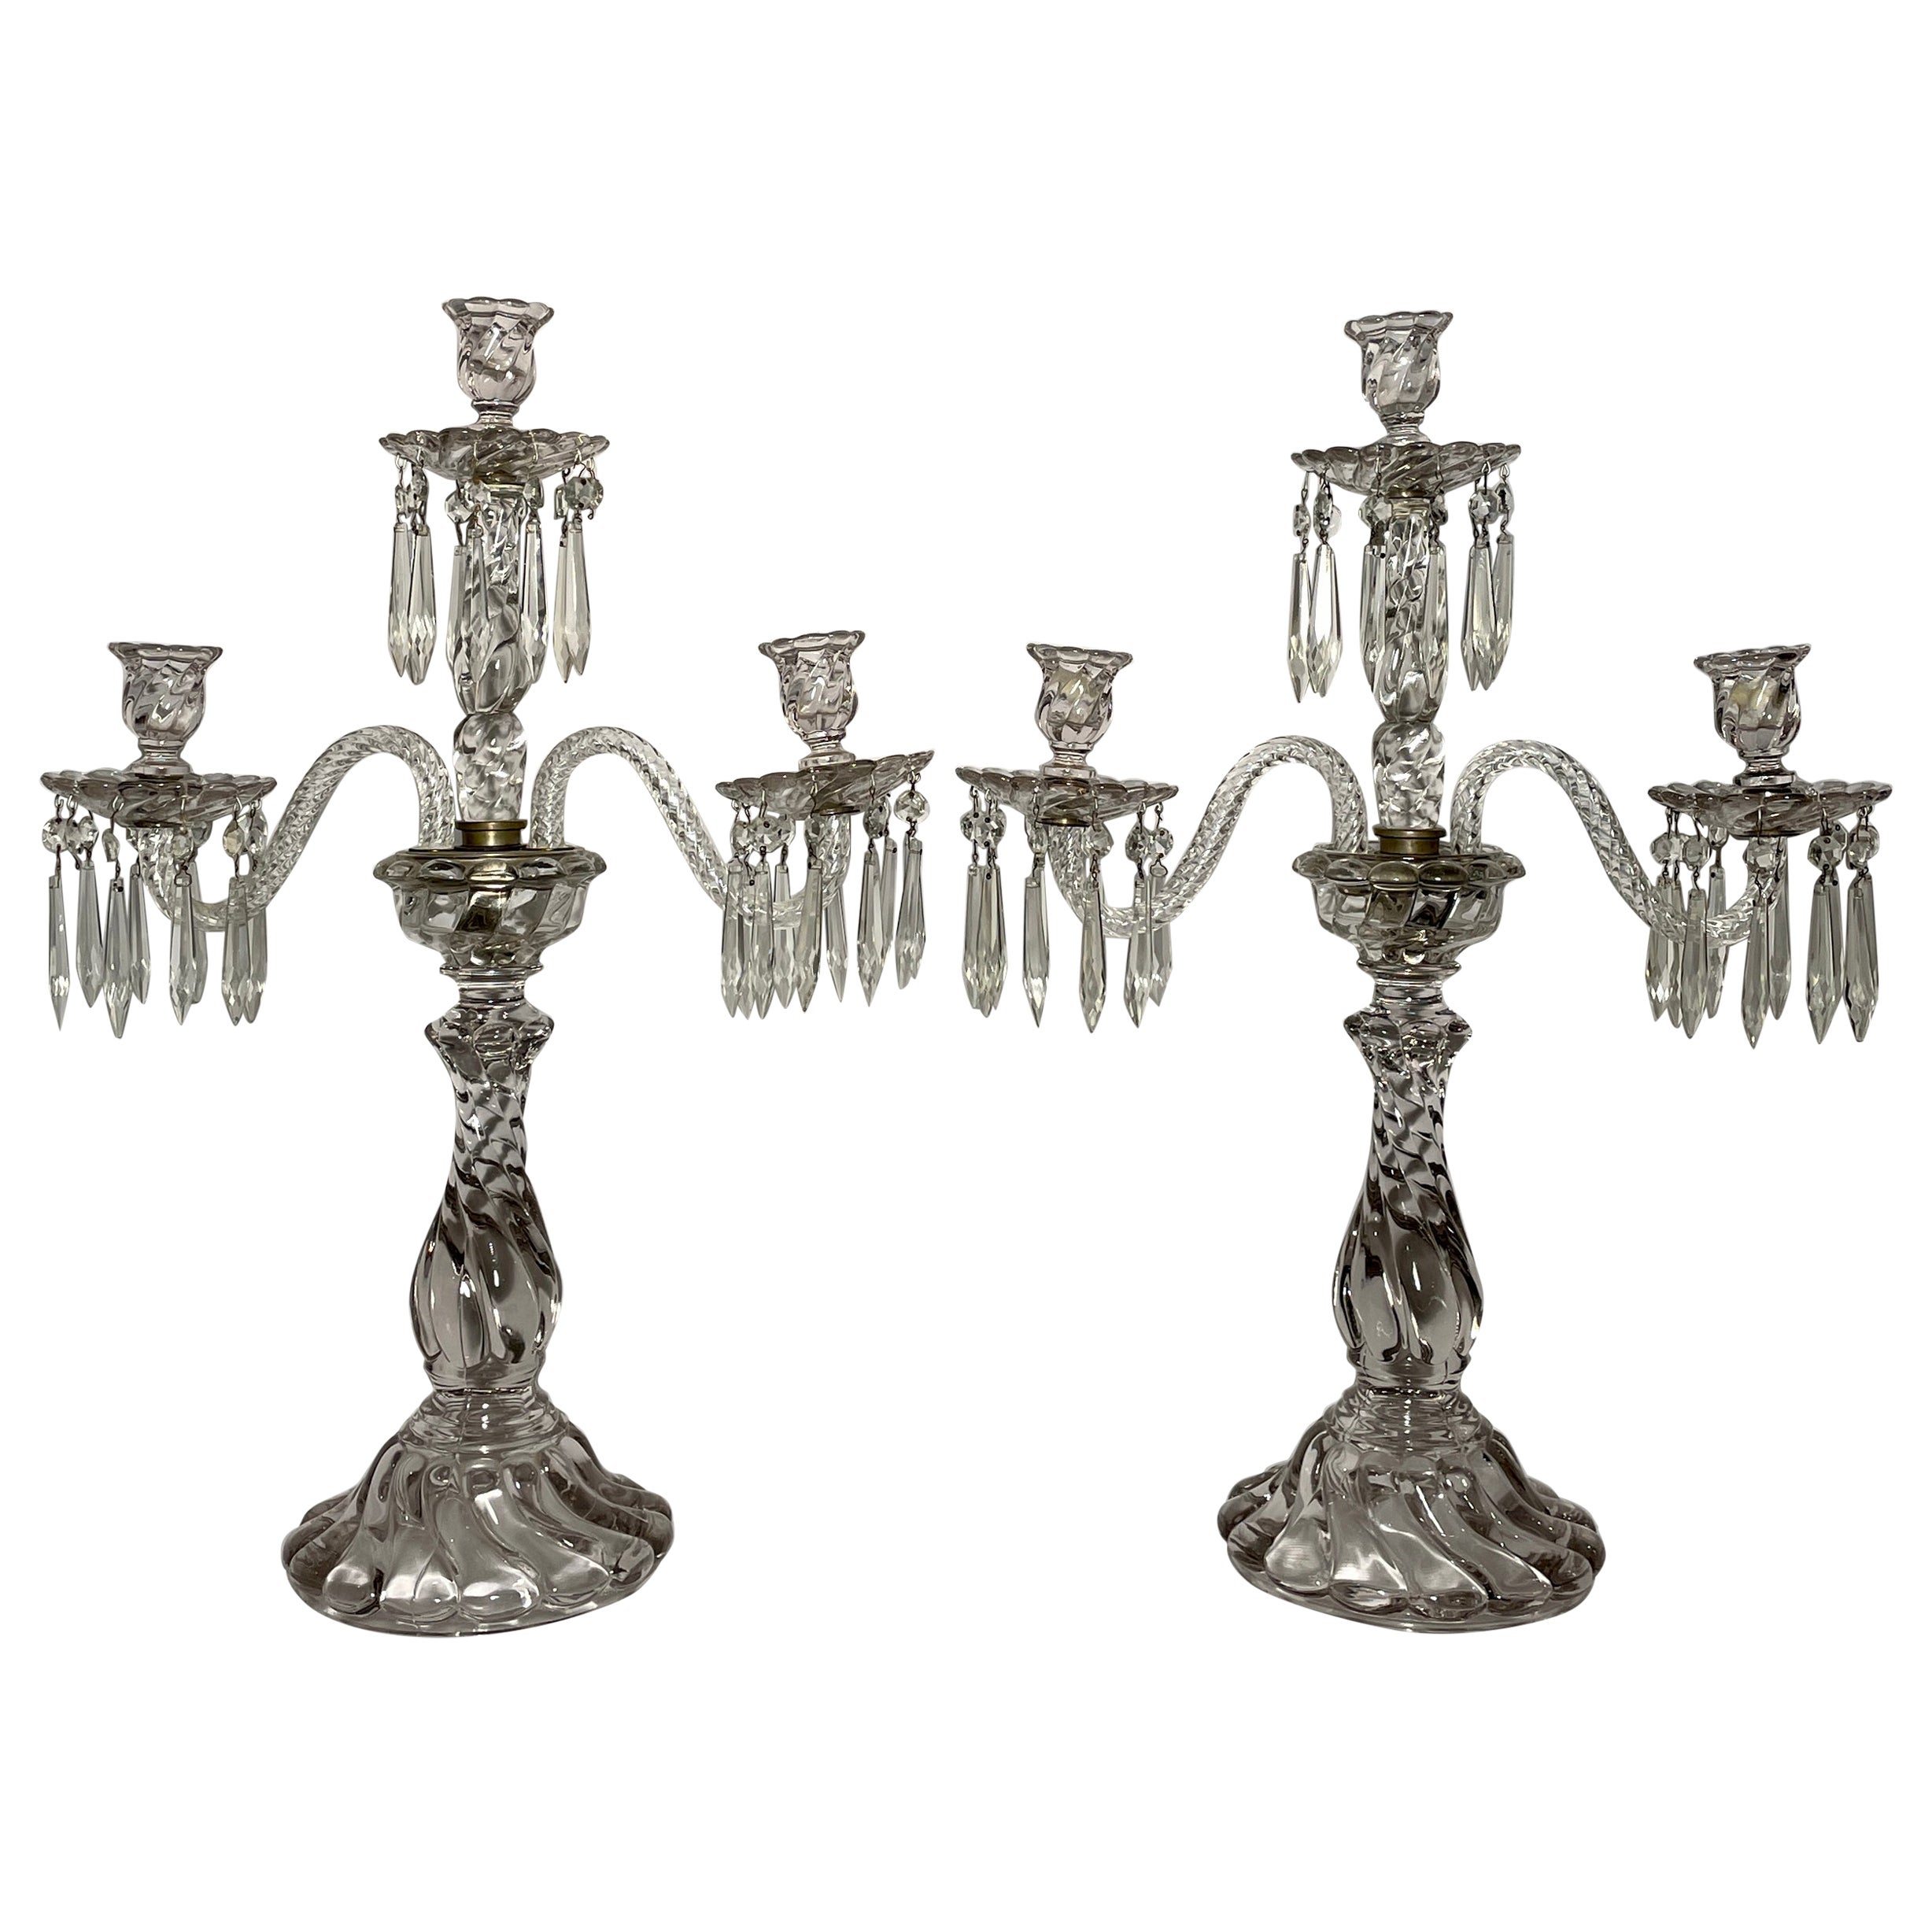 Pair Antique French Cut Crystal 3 Candle Cup Candelabra, circa 1890-1900